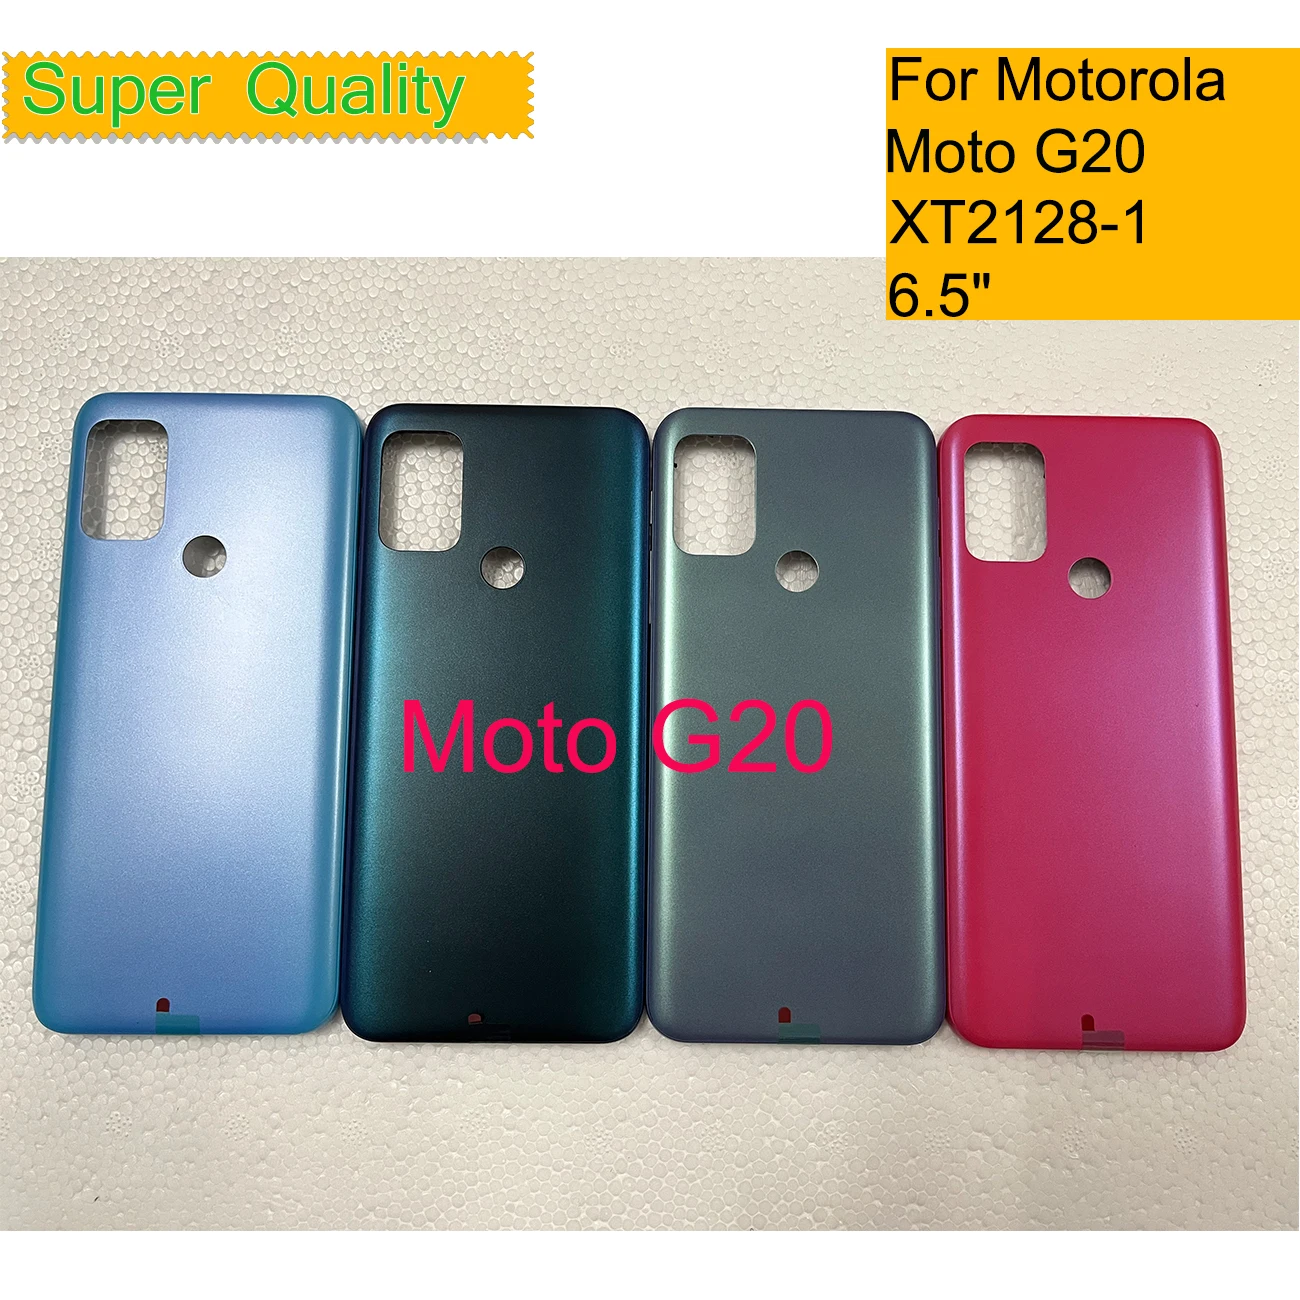 

10Pcs/Lot For Motorola Moto G20 XT2128-1 Housing Battery Cover Back Cover Case Rear Door Chassis Shell G20 XT2128-2 Replacement